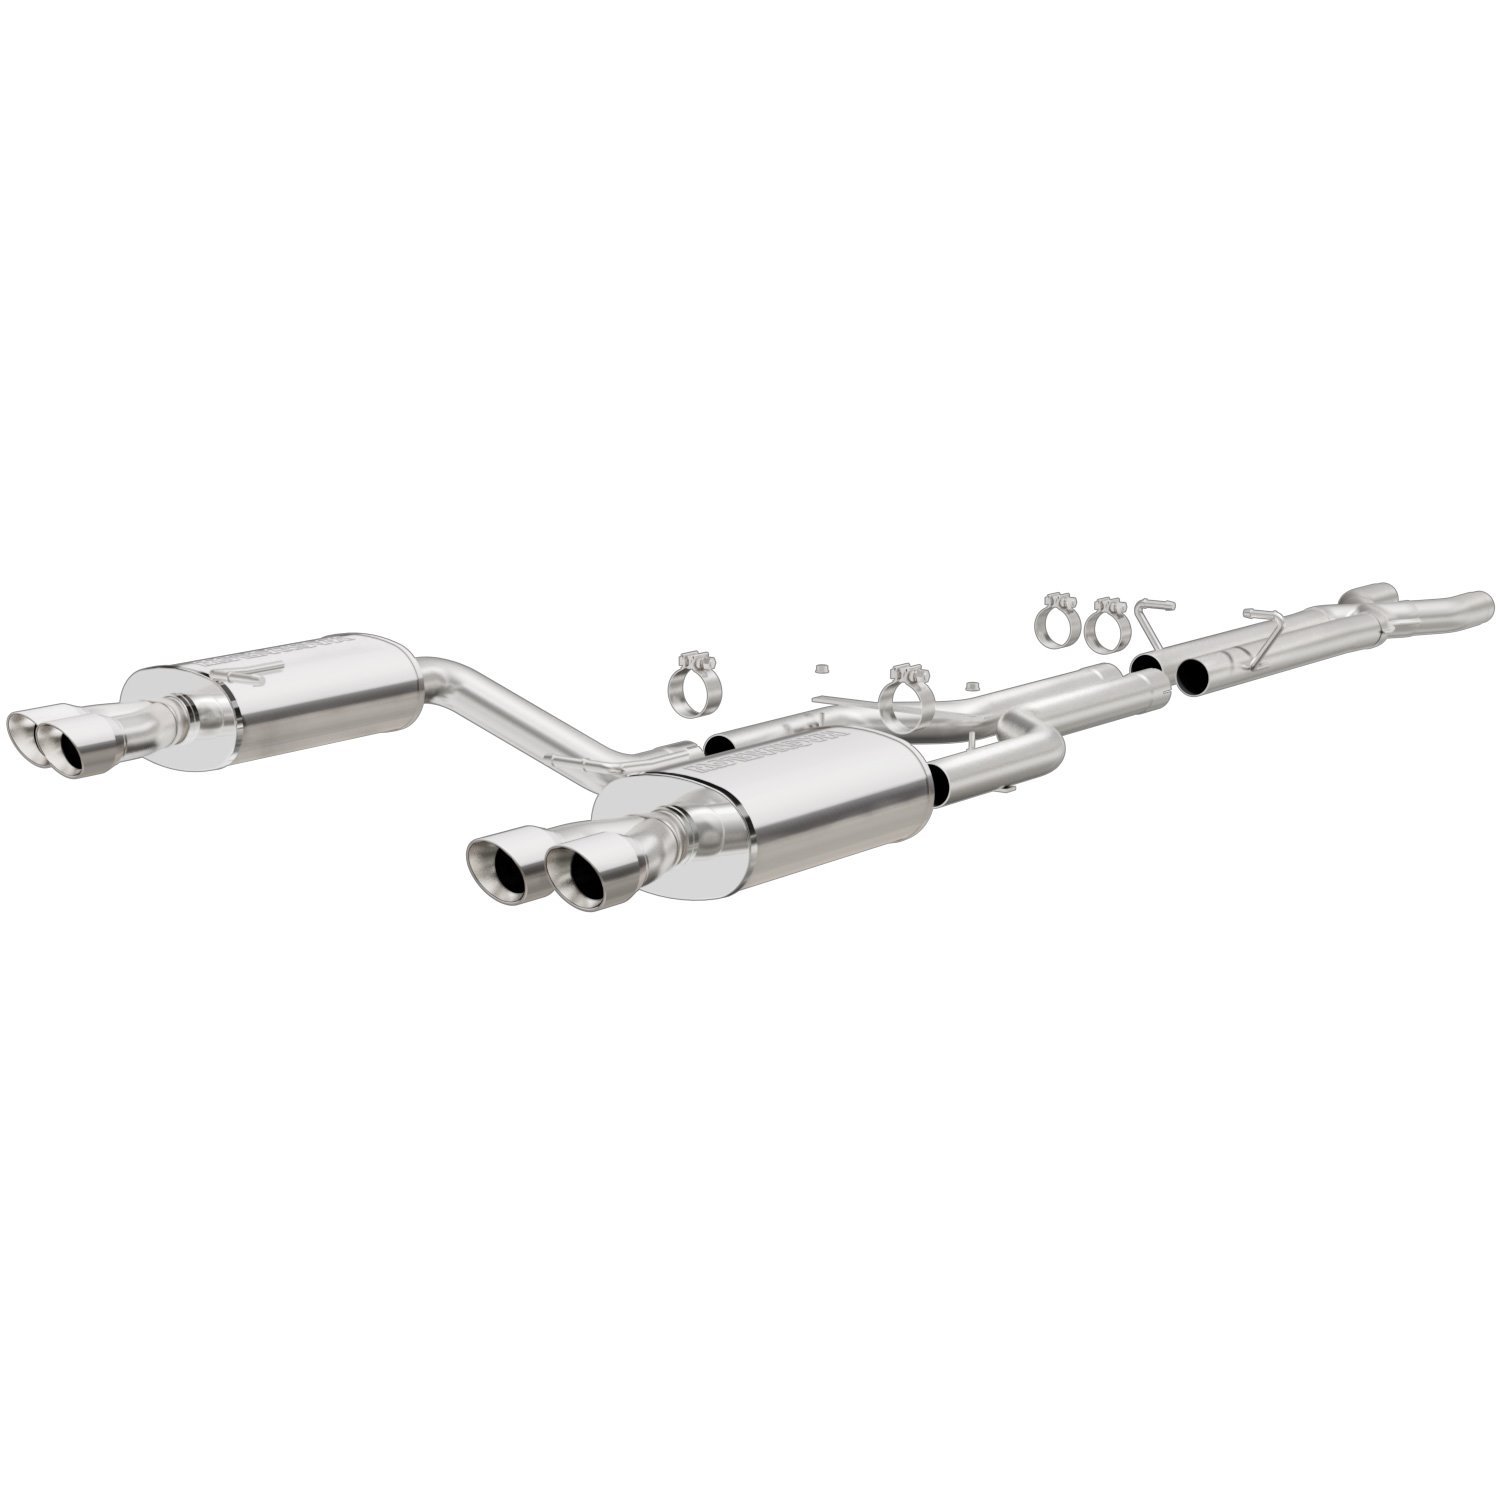 Touring Series Cat-Back Exhaust System 2006-08 Audi RS4 4.2L V8